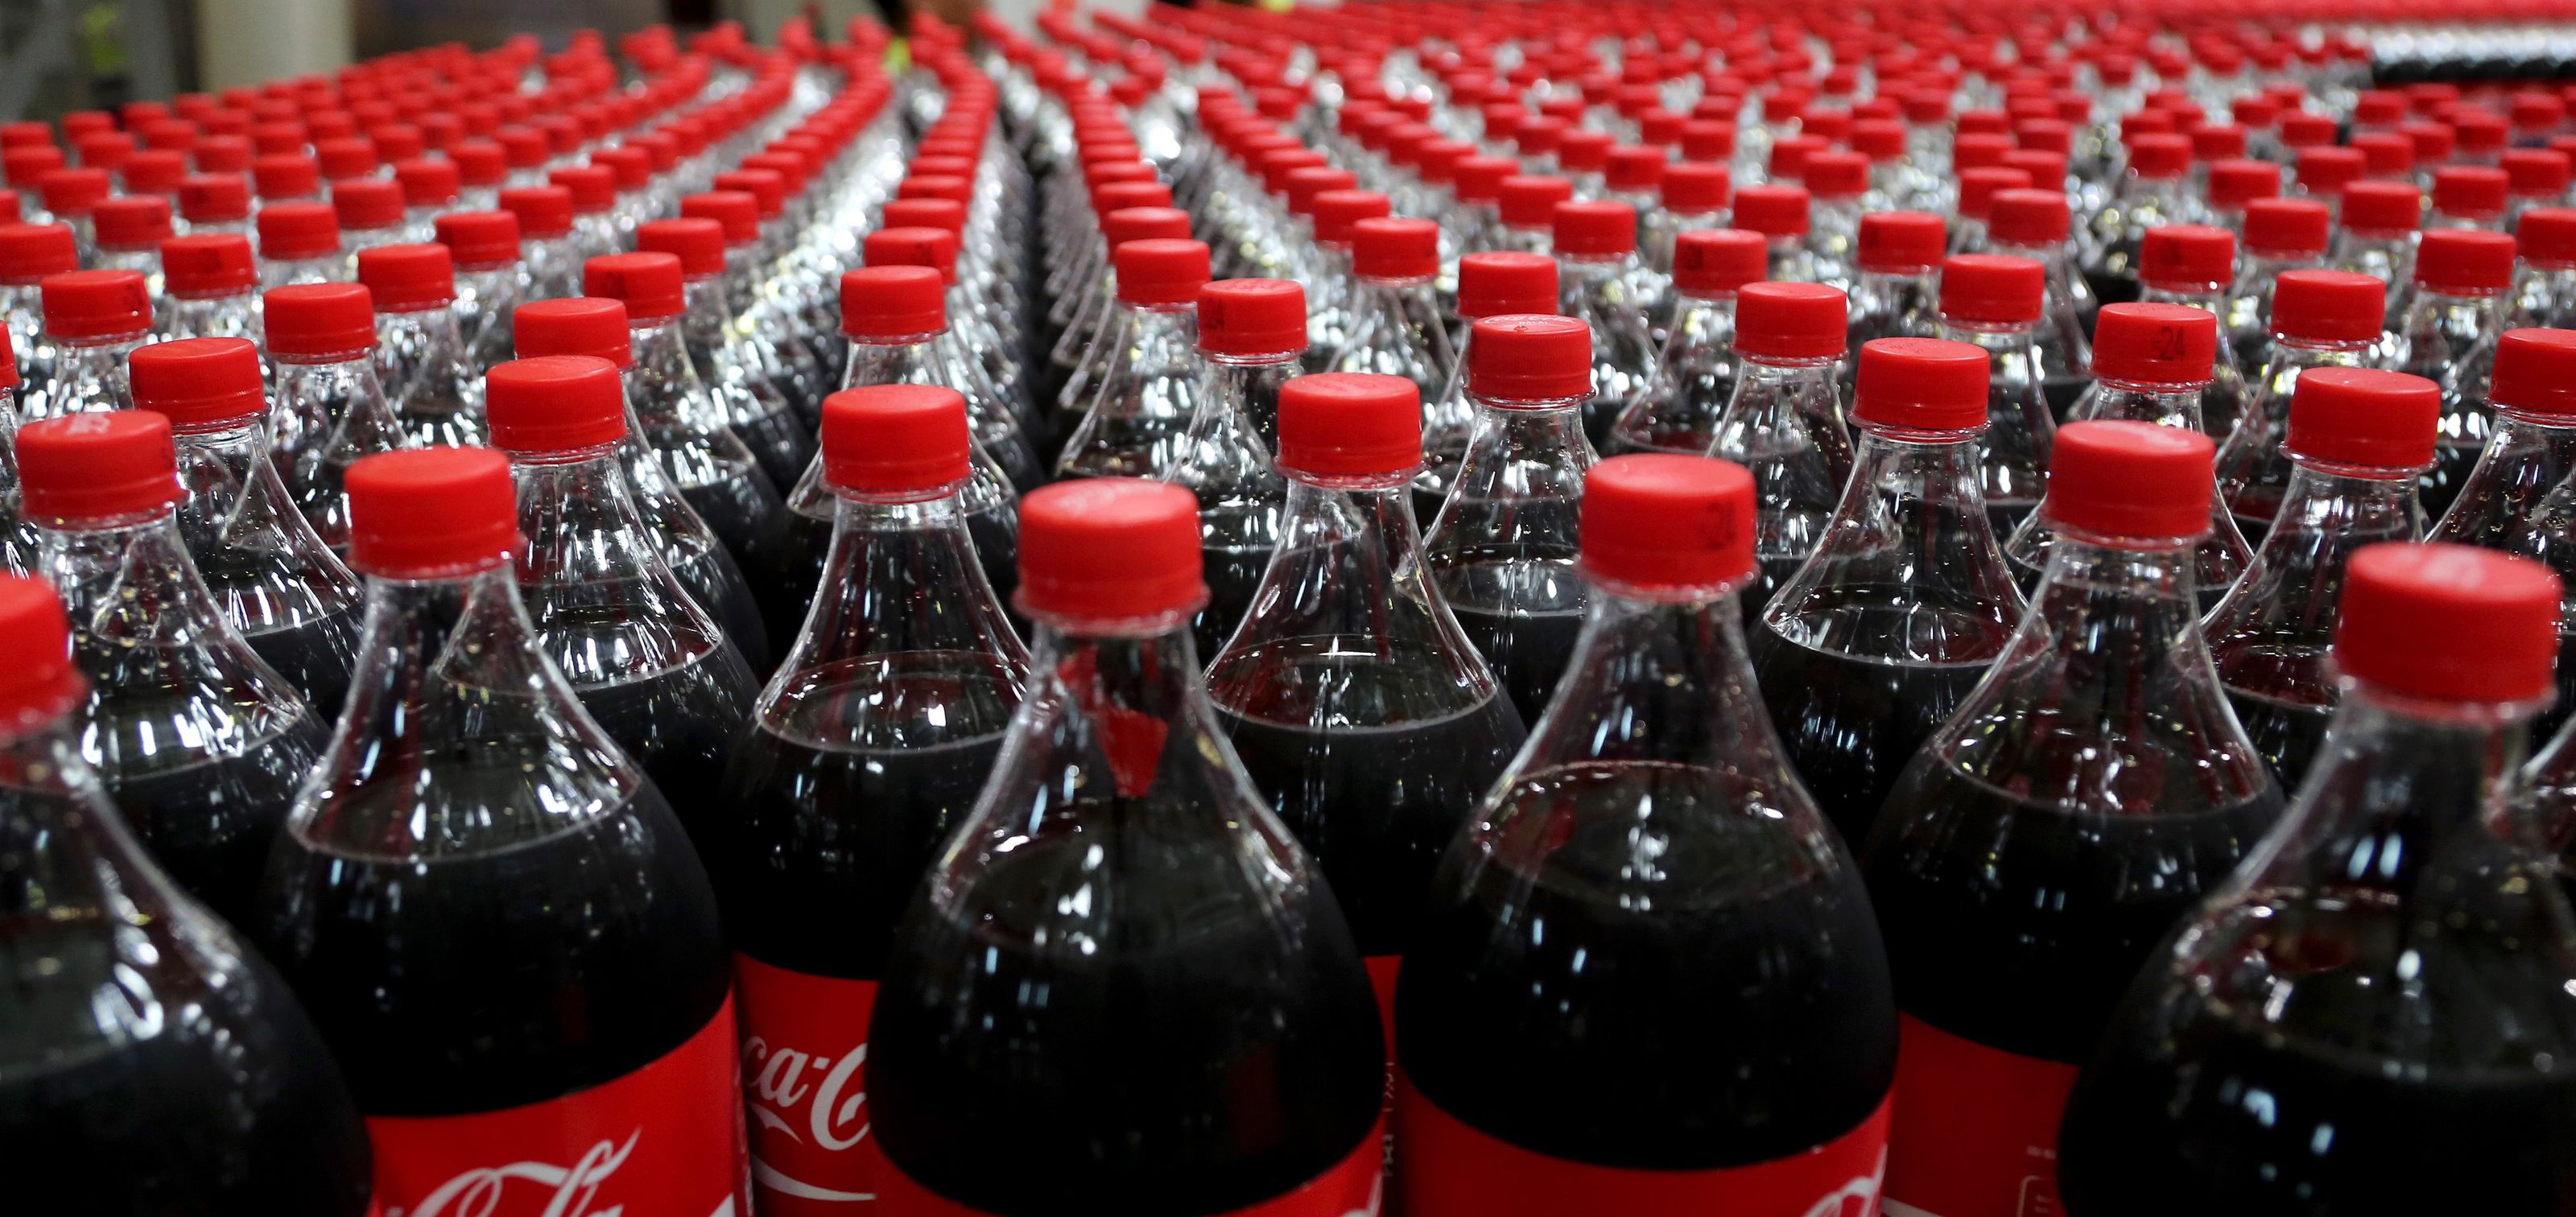 Coca Cola gets amazing revenue boosts  The global leader in the beverage industry increased its forecast for annual sales once again in 2018